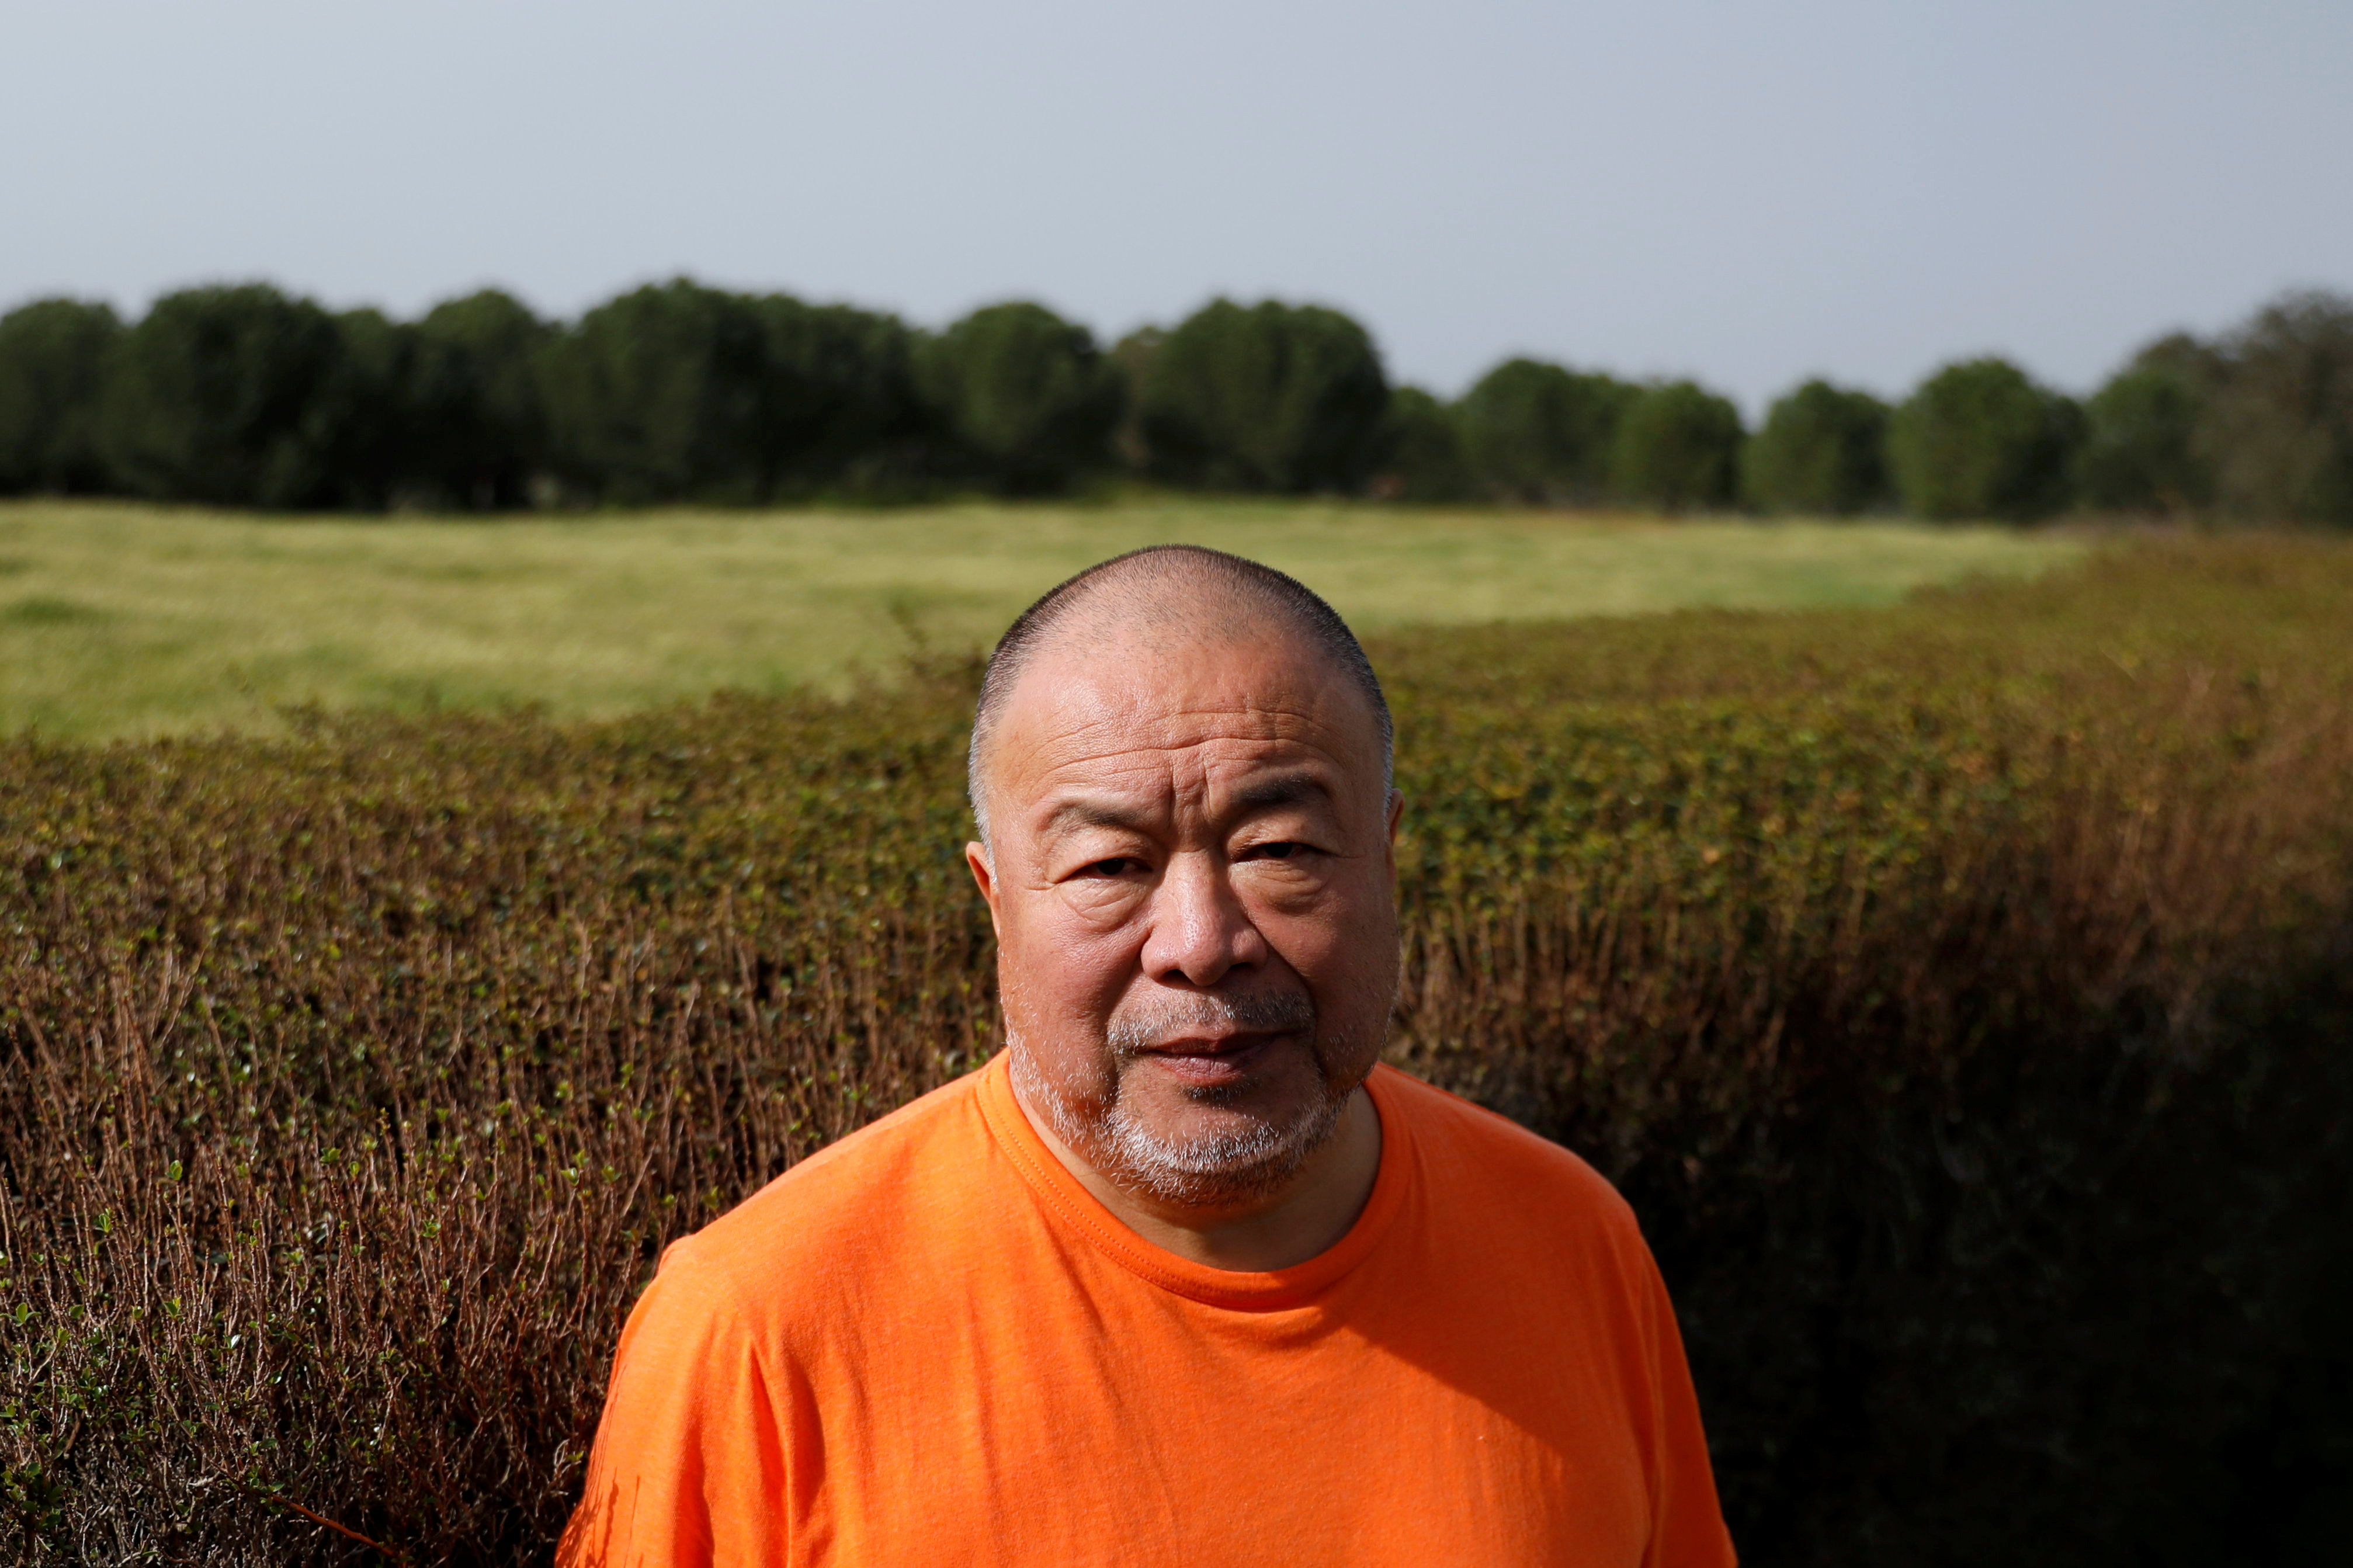 From new Portuguese home, Ai Weiwei plans tribute to "visionary" Gorbachev  | Reuters